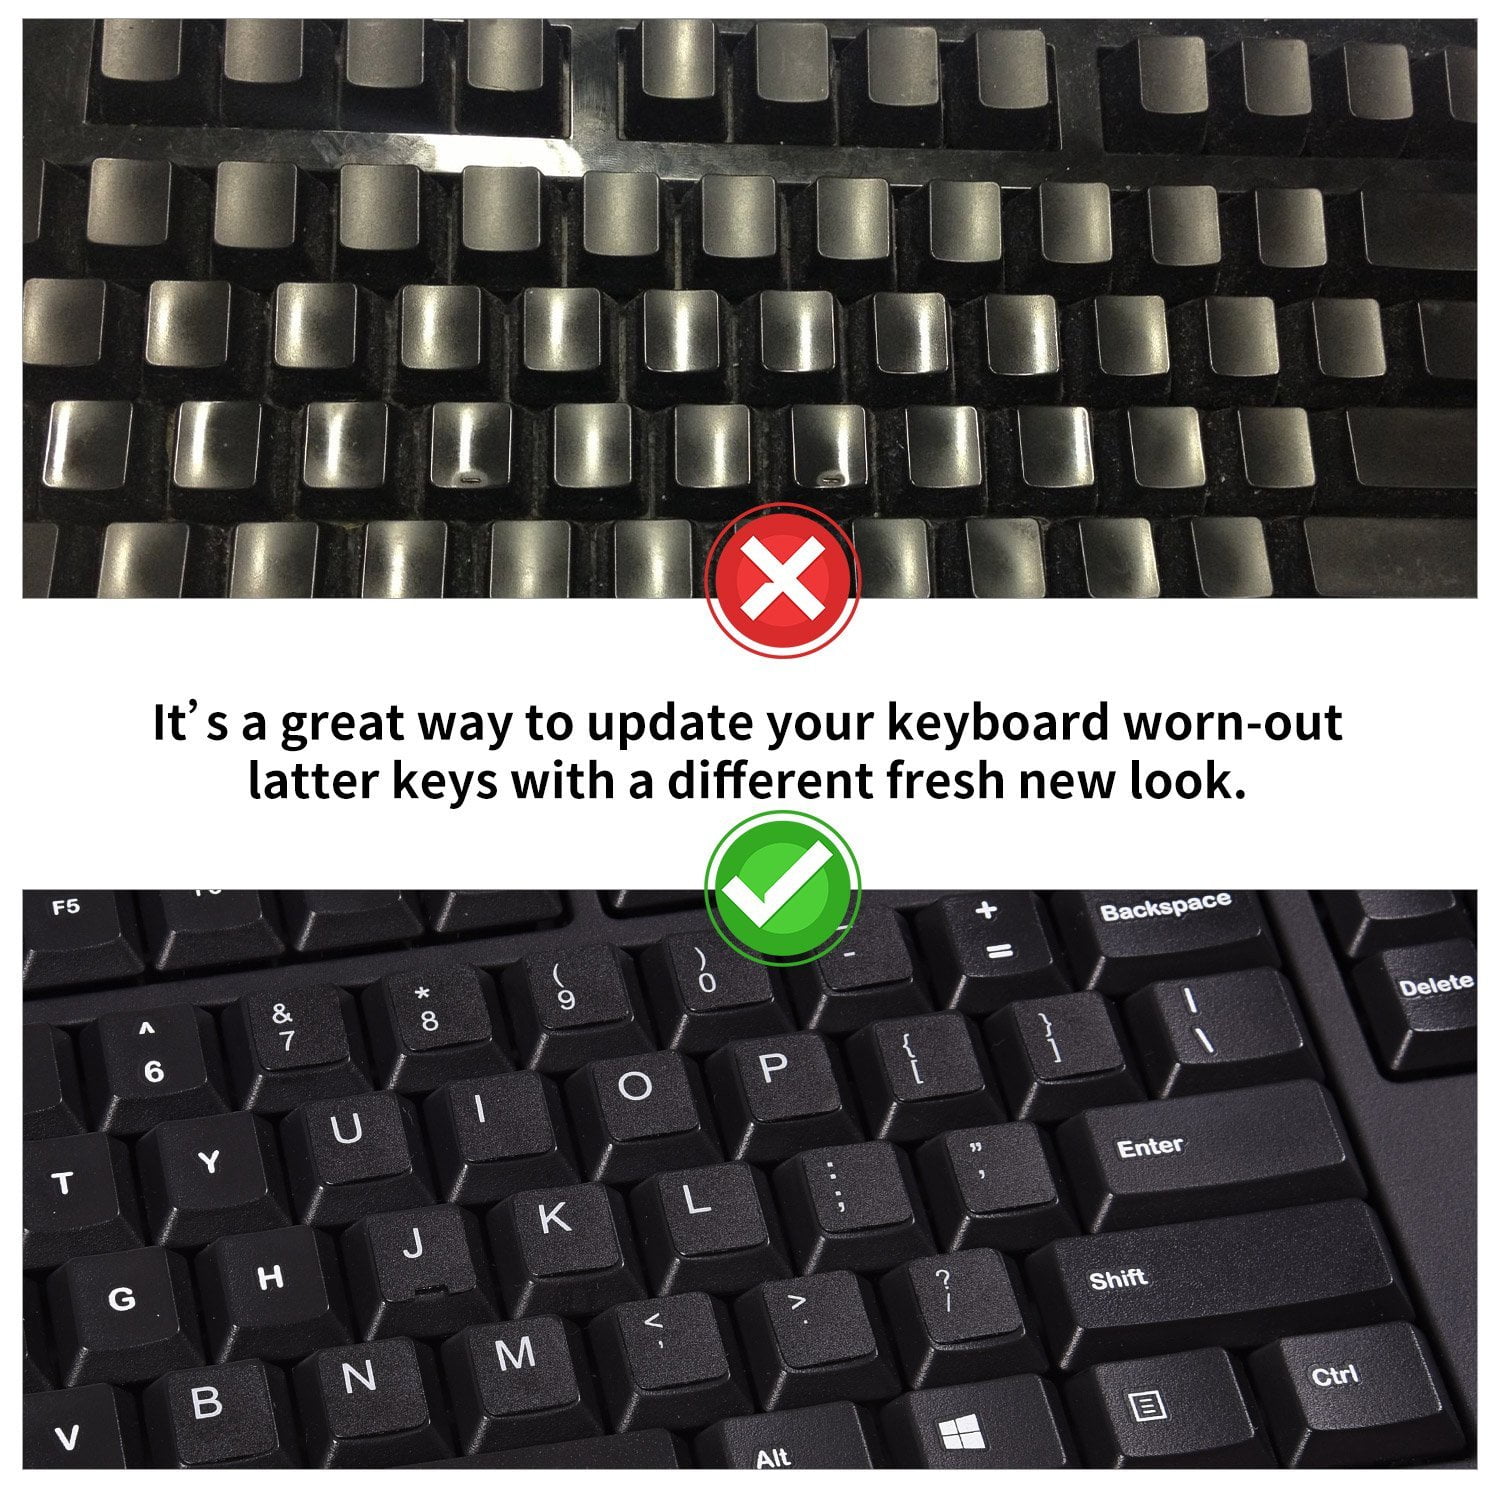 English Replacement Computer Keyboard Stickers Transparent Background with White Lettering for Computer Laptop Notebook Desktop 2 Pack Universal English Keyboard Stickers Transparent Background 